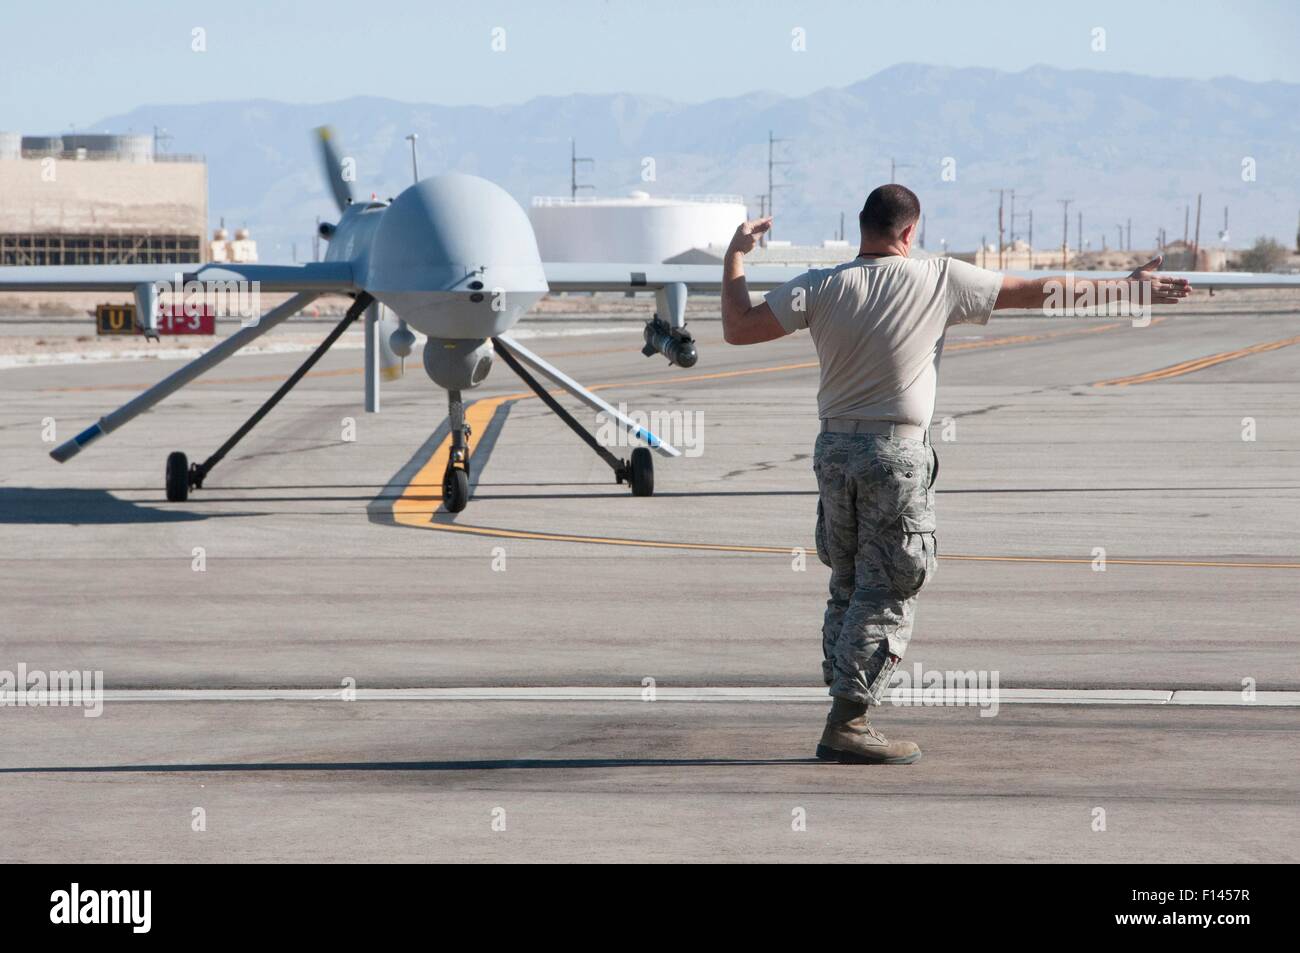 US Air Force MQ-1 Predator unmanned aerial vehicle assigned to the California Air National Guard's 163rd Reconnaissance Wing is marshaled to parking on the apron after landing at Southern California Logistics Airport November 3, 2012 in Victorville, CA. Stock Photo